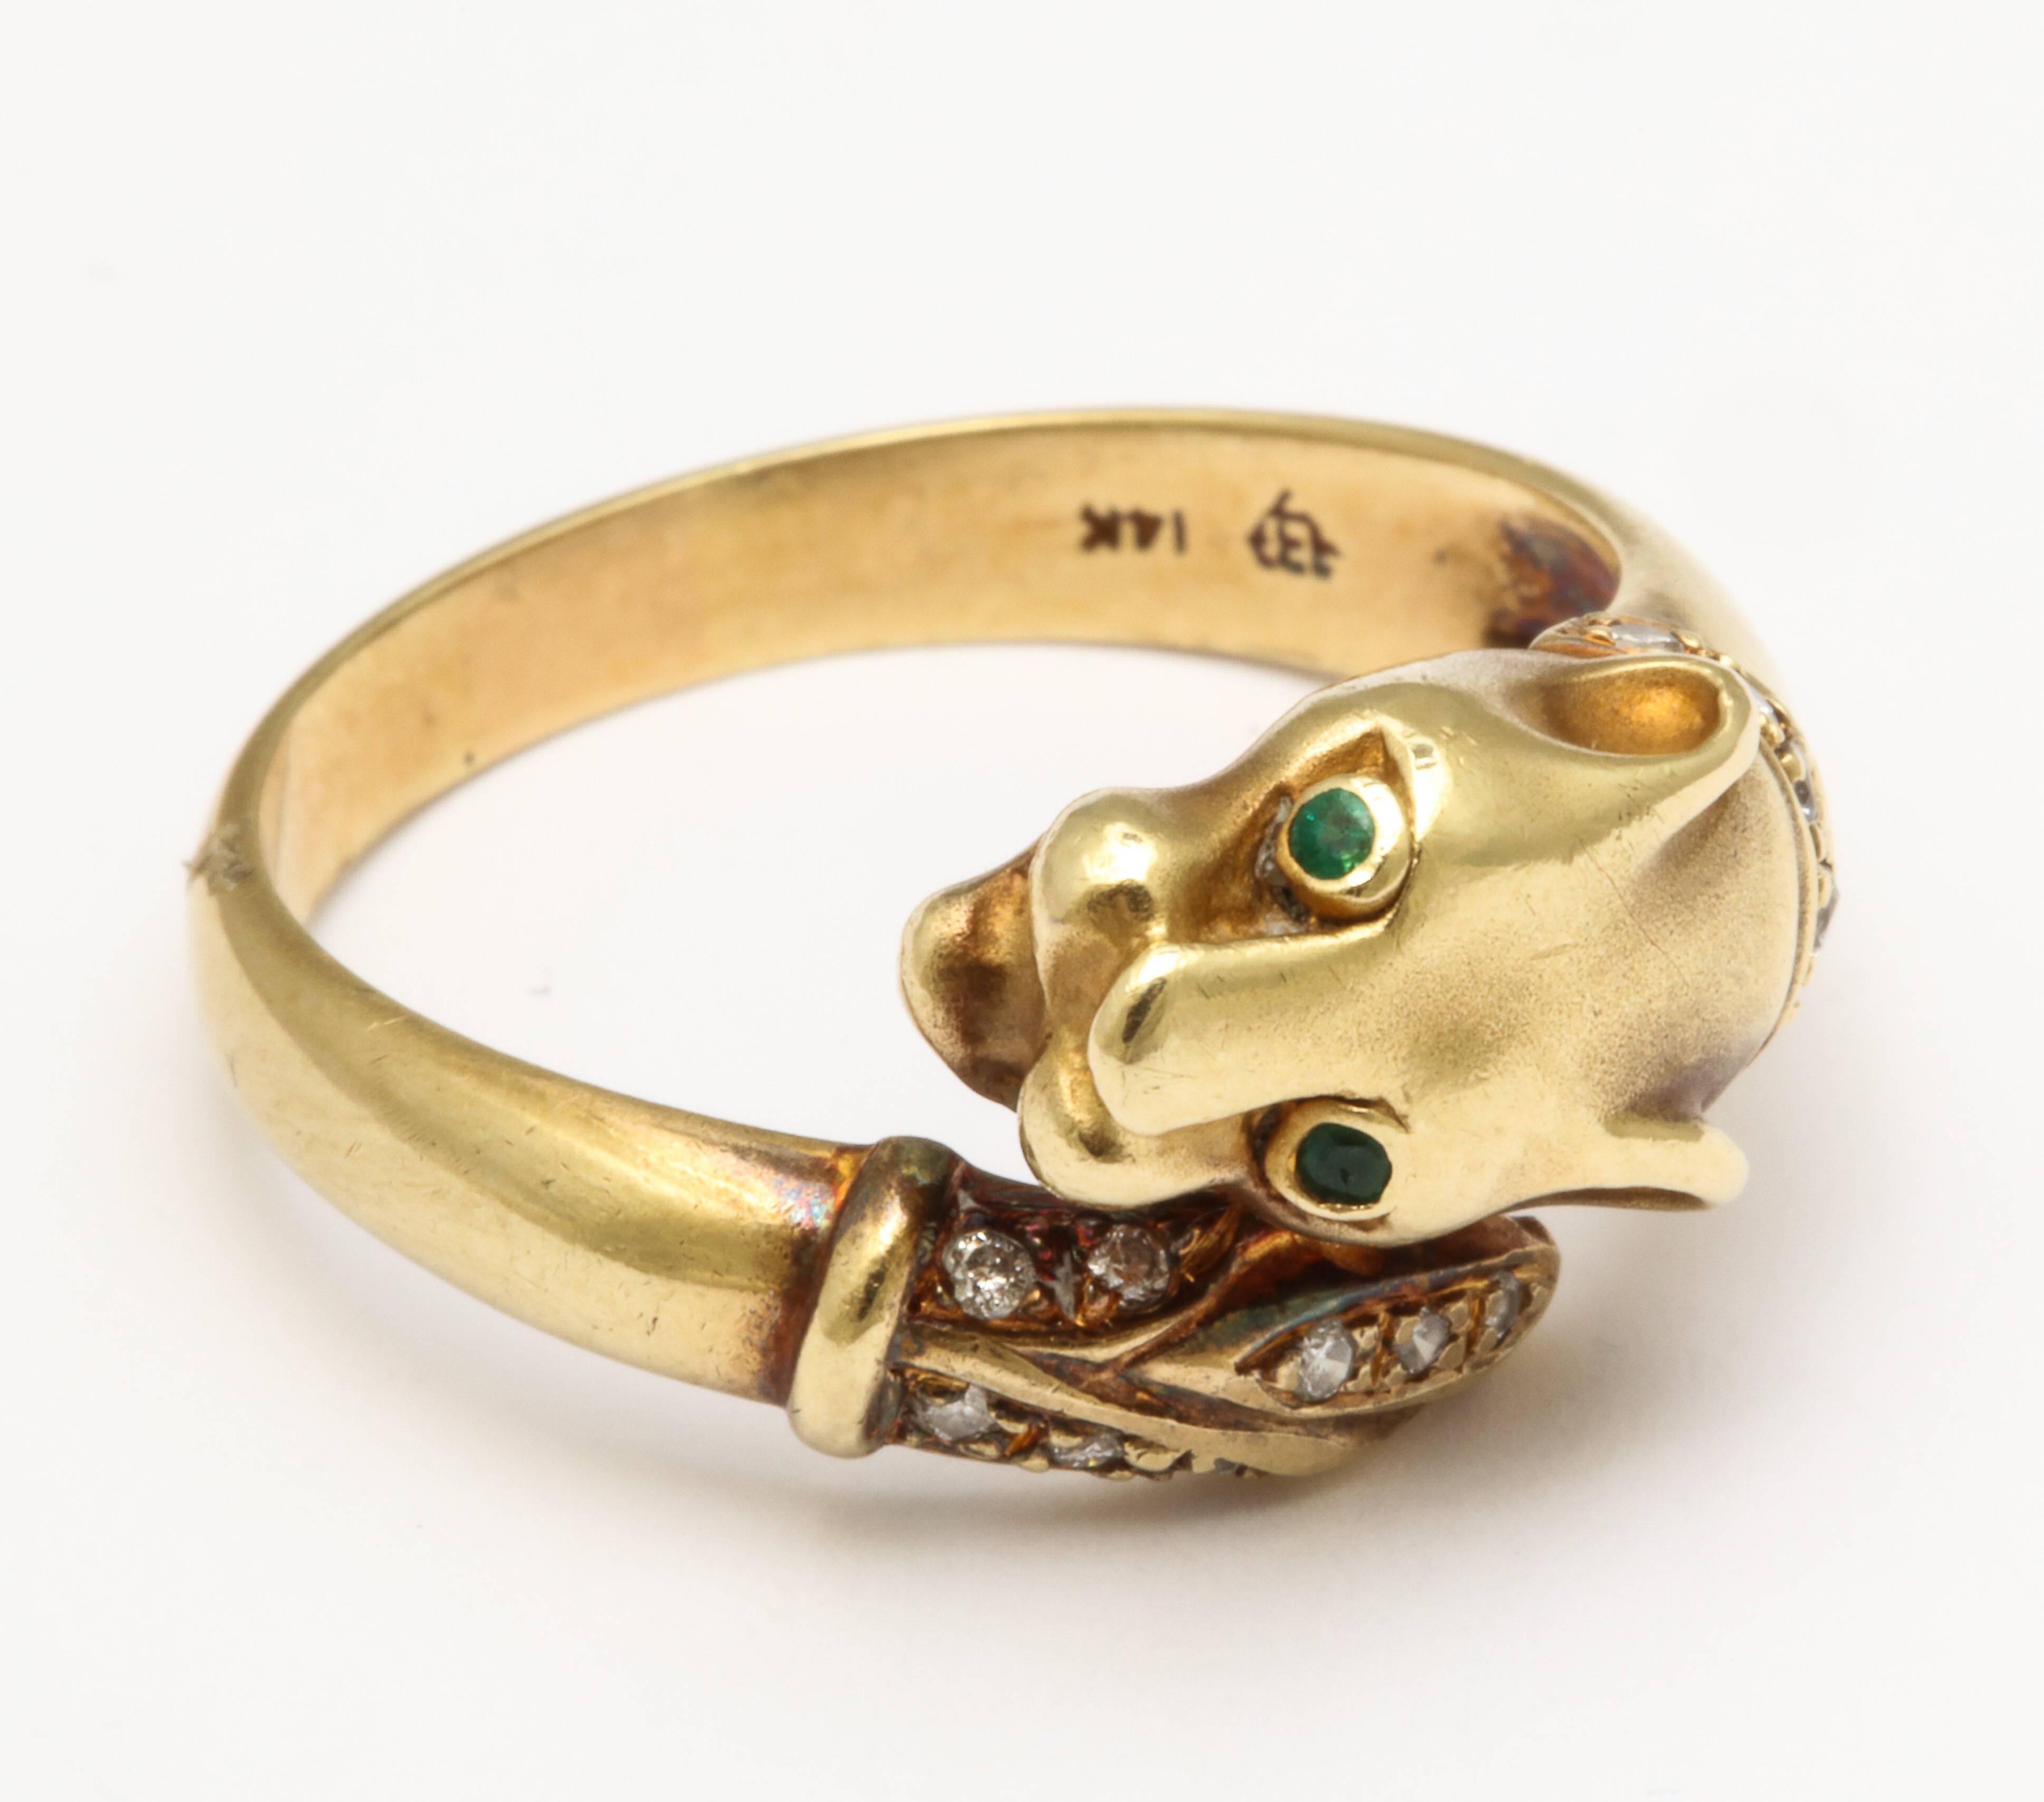 A tamed panther,  almost smiling, with emerald eyes, a tail of tiny full cut diamonds and a diamond collar, wraps around your finger once and is not at all fierce. It is perfect to pair with other rings if desired. The ring has a hefty shank,